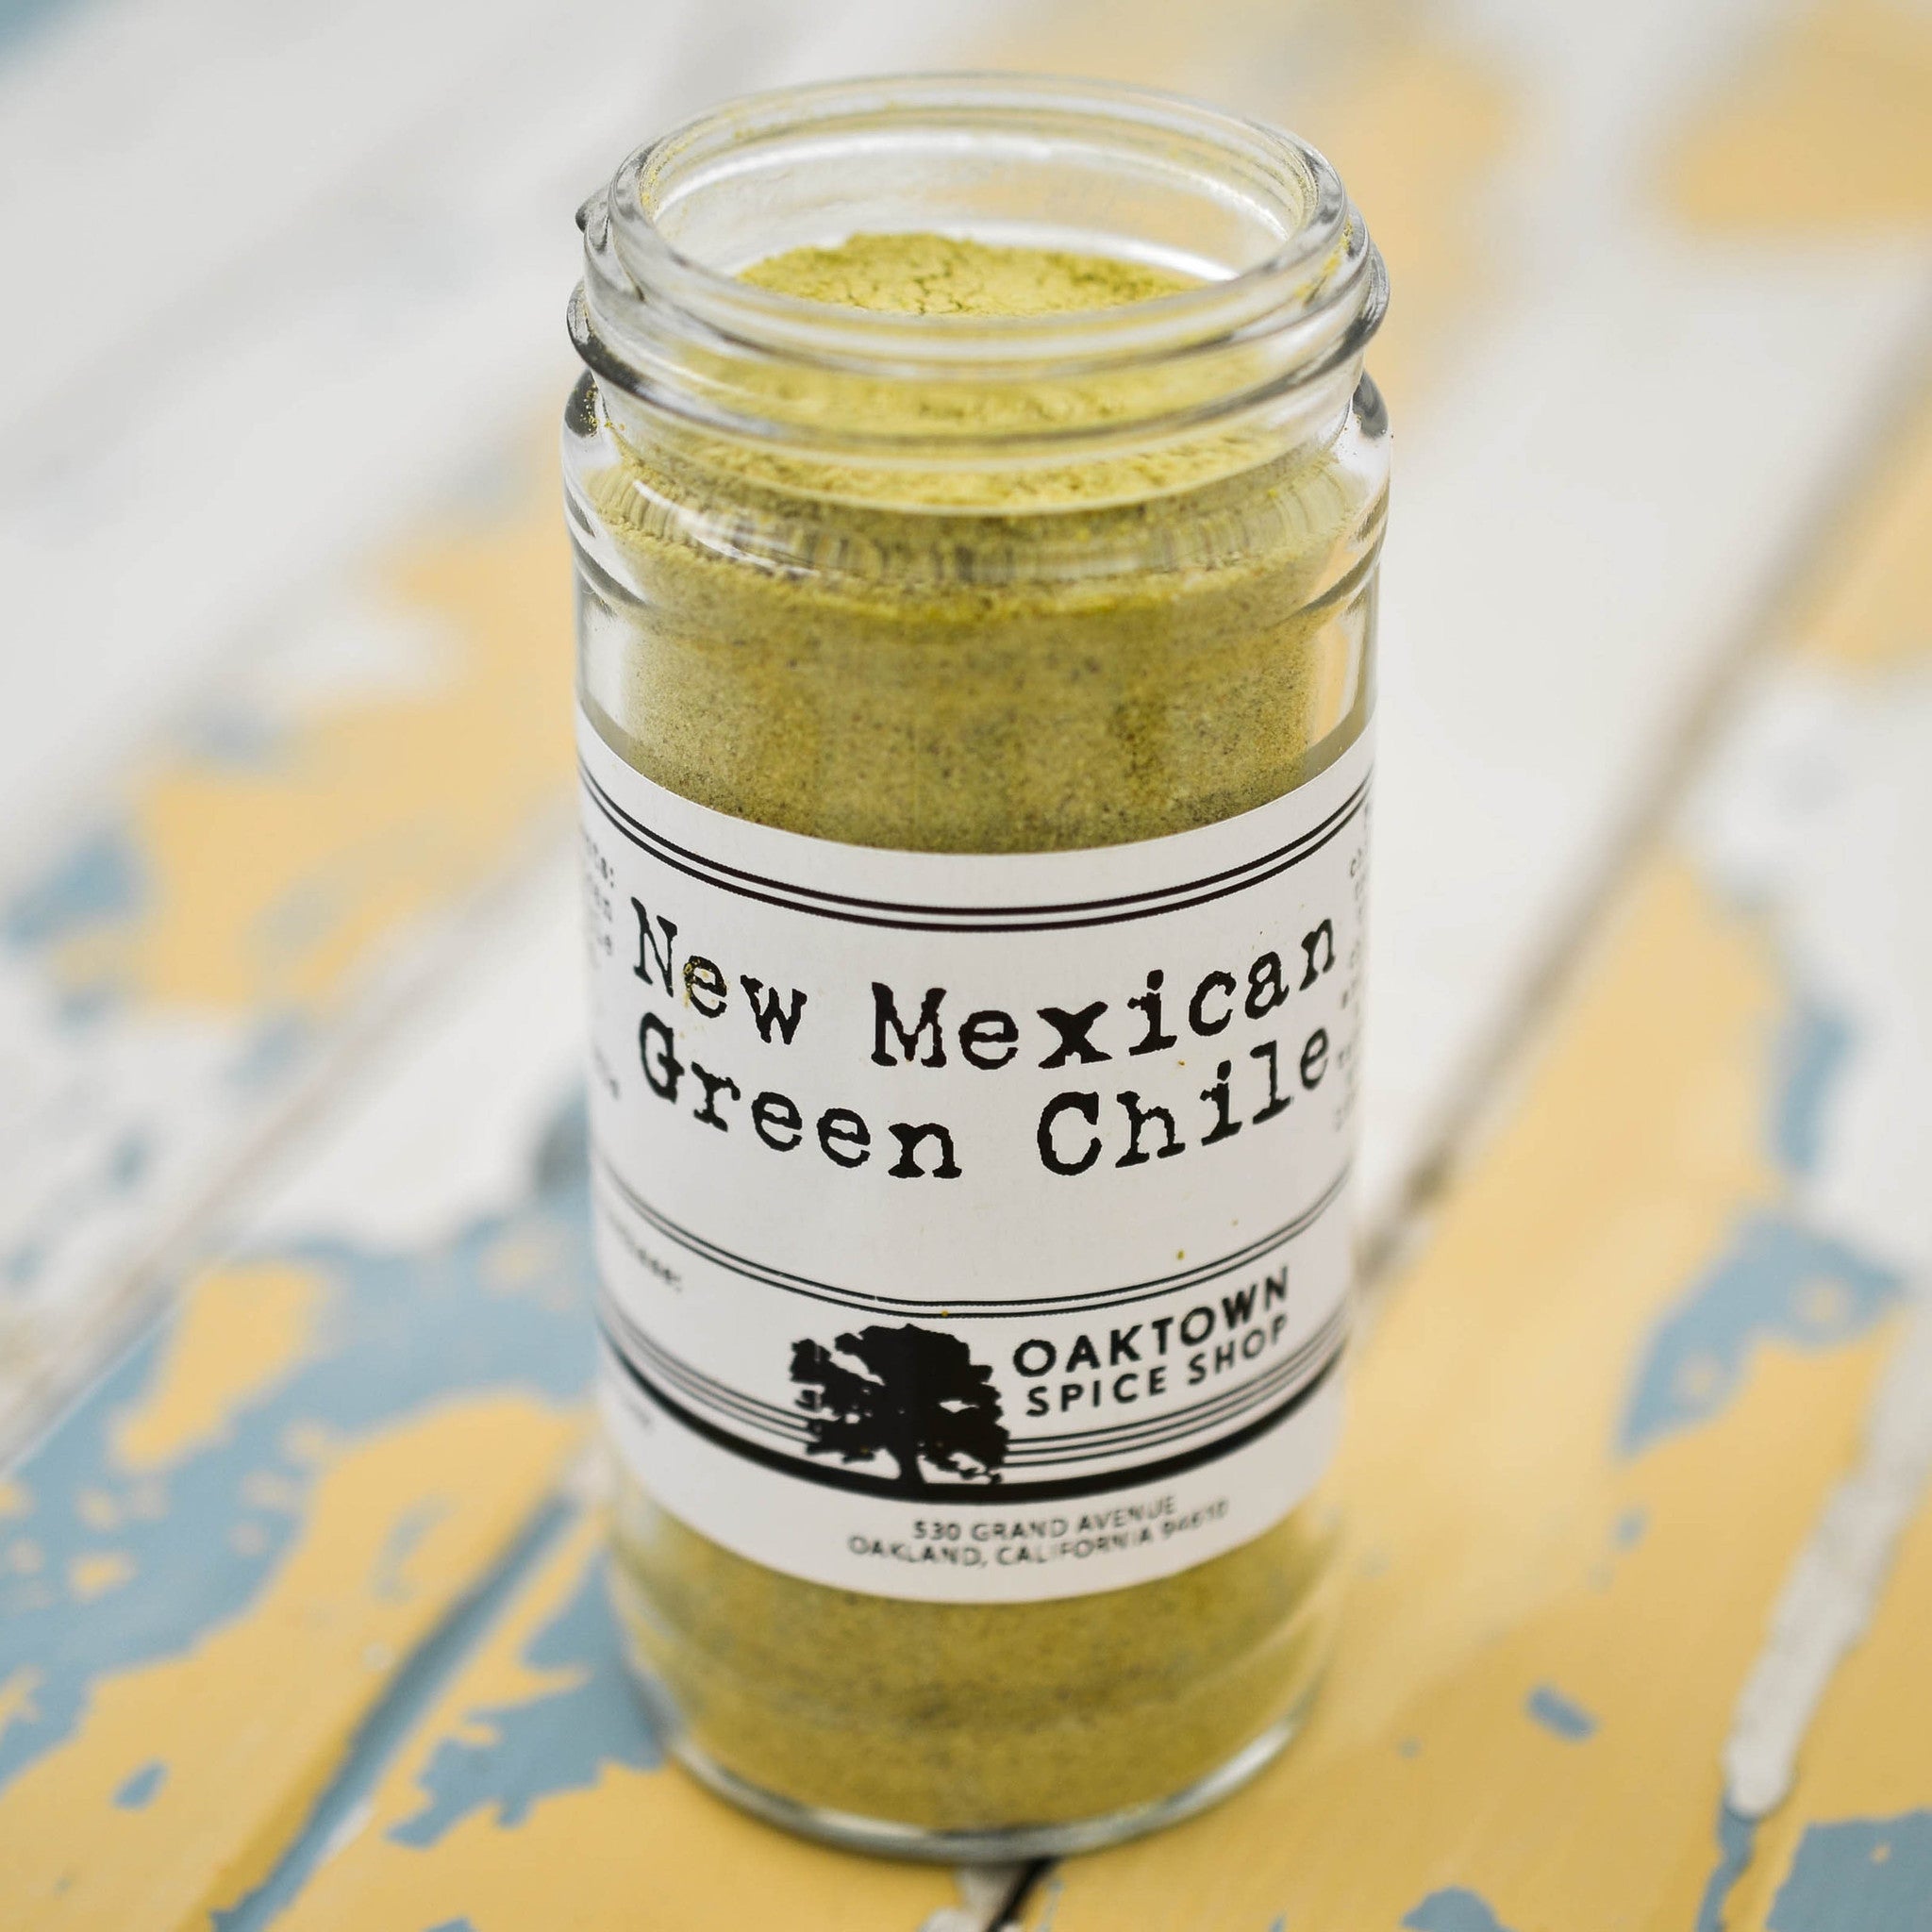 Green Chile Ranch - The Spice House